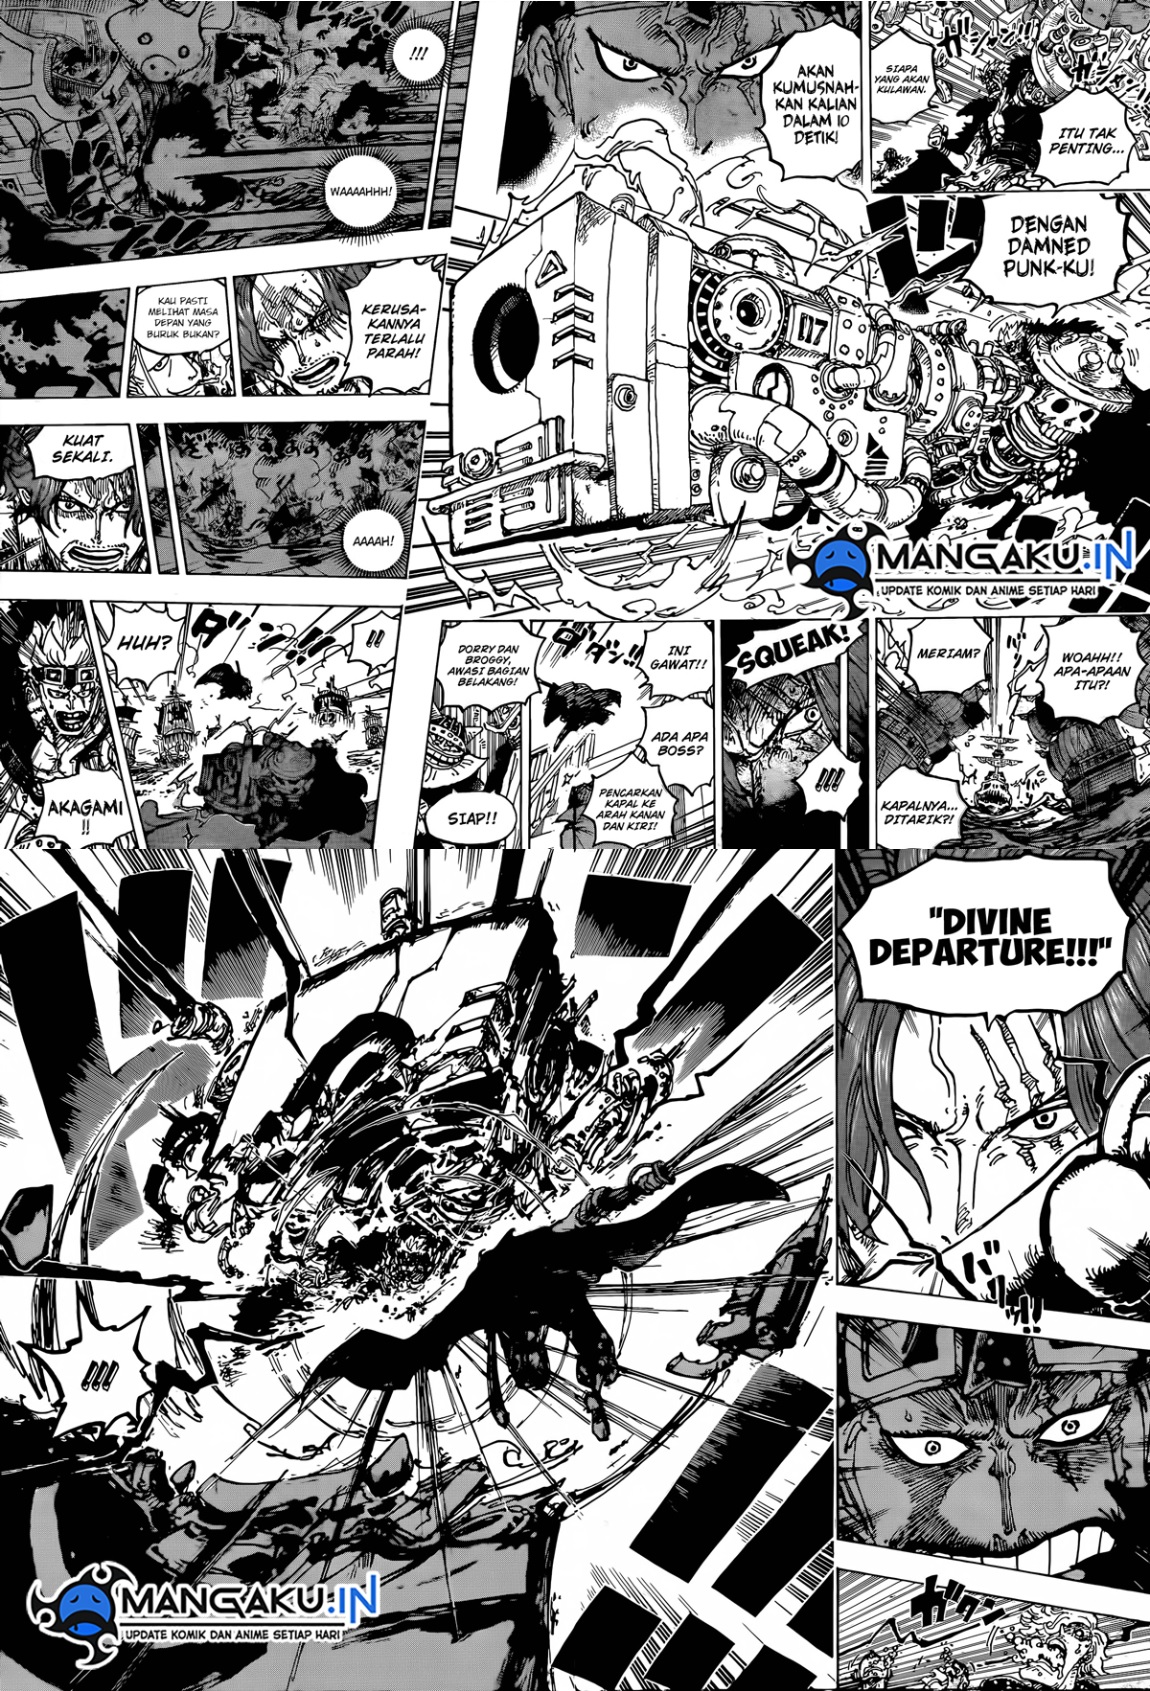 One Piece Chapter 1079